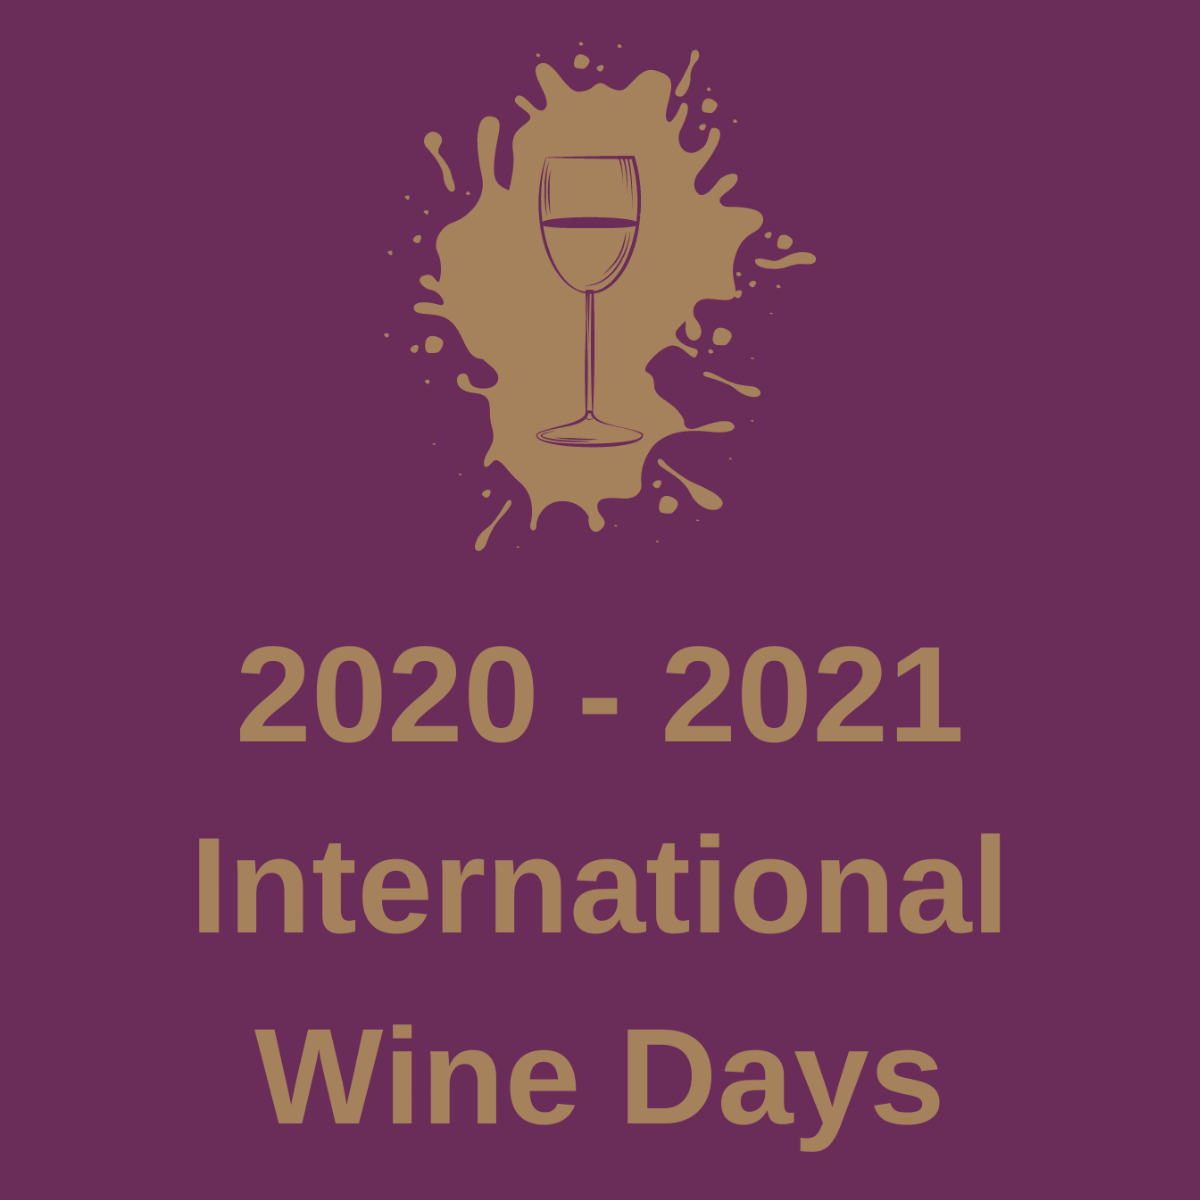 Best Moscato Wine 2021 Full List of Wine Holidays 2020 & 2021 | Travelling Corkscrew